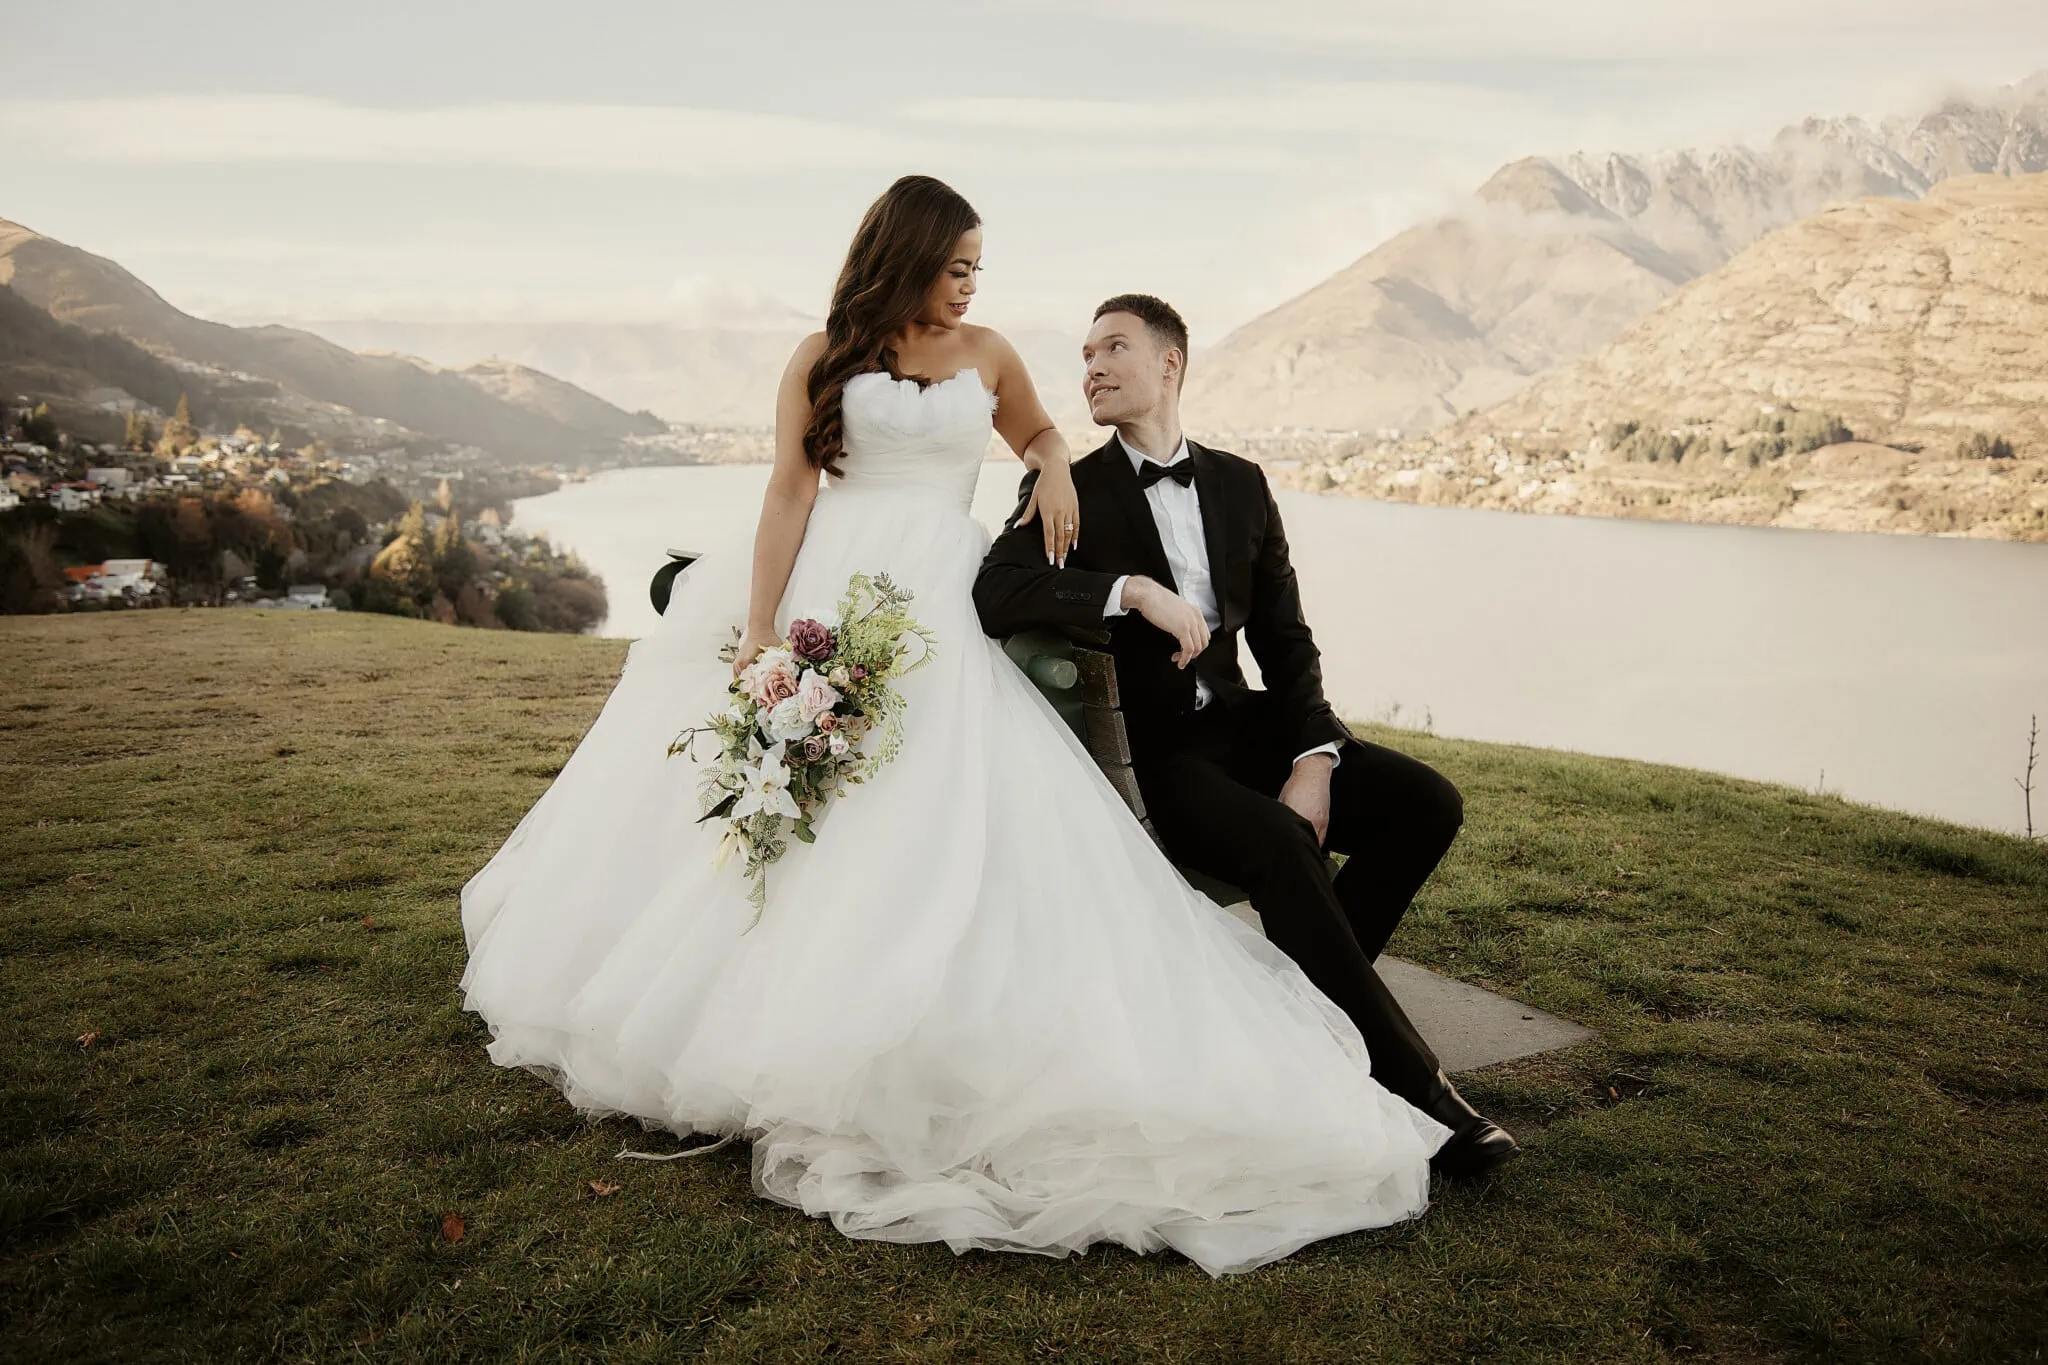 Queenstown New Zealand Elopement Wedding Photographer - Amy and Callum's Queenstown Heli Pre Wedding Shoot features a bride and groom sitting on a bench in front of a lake.